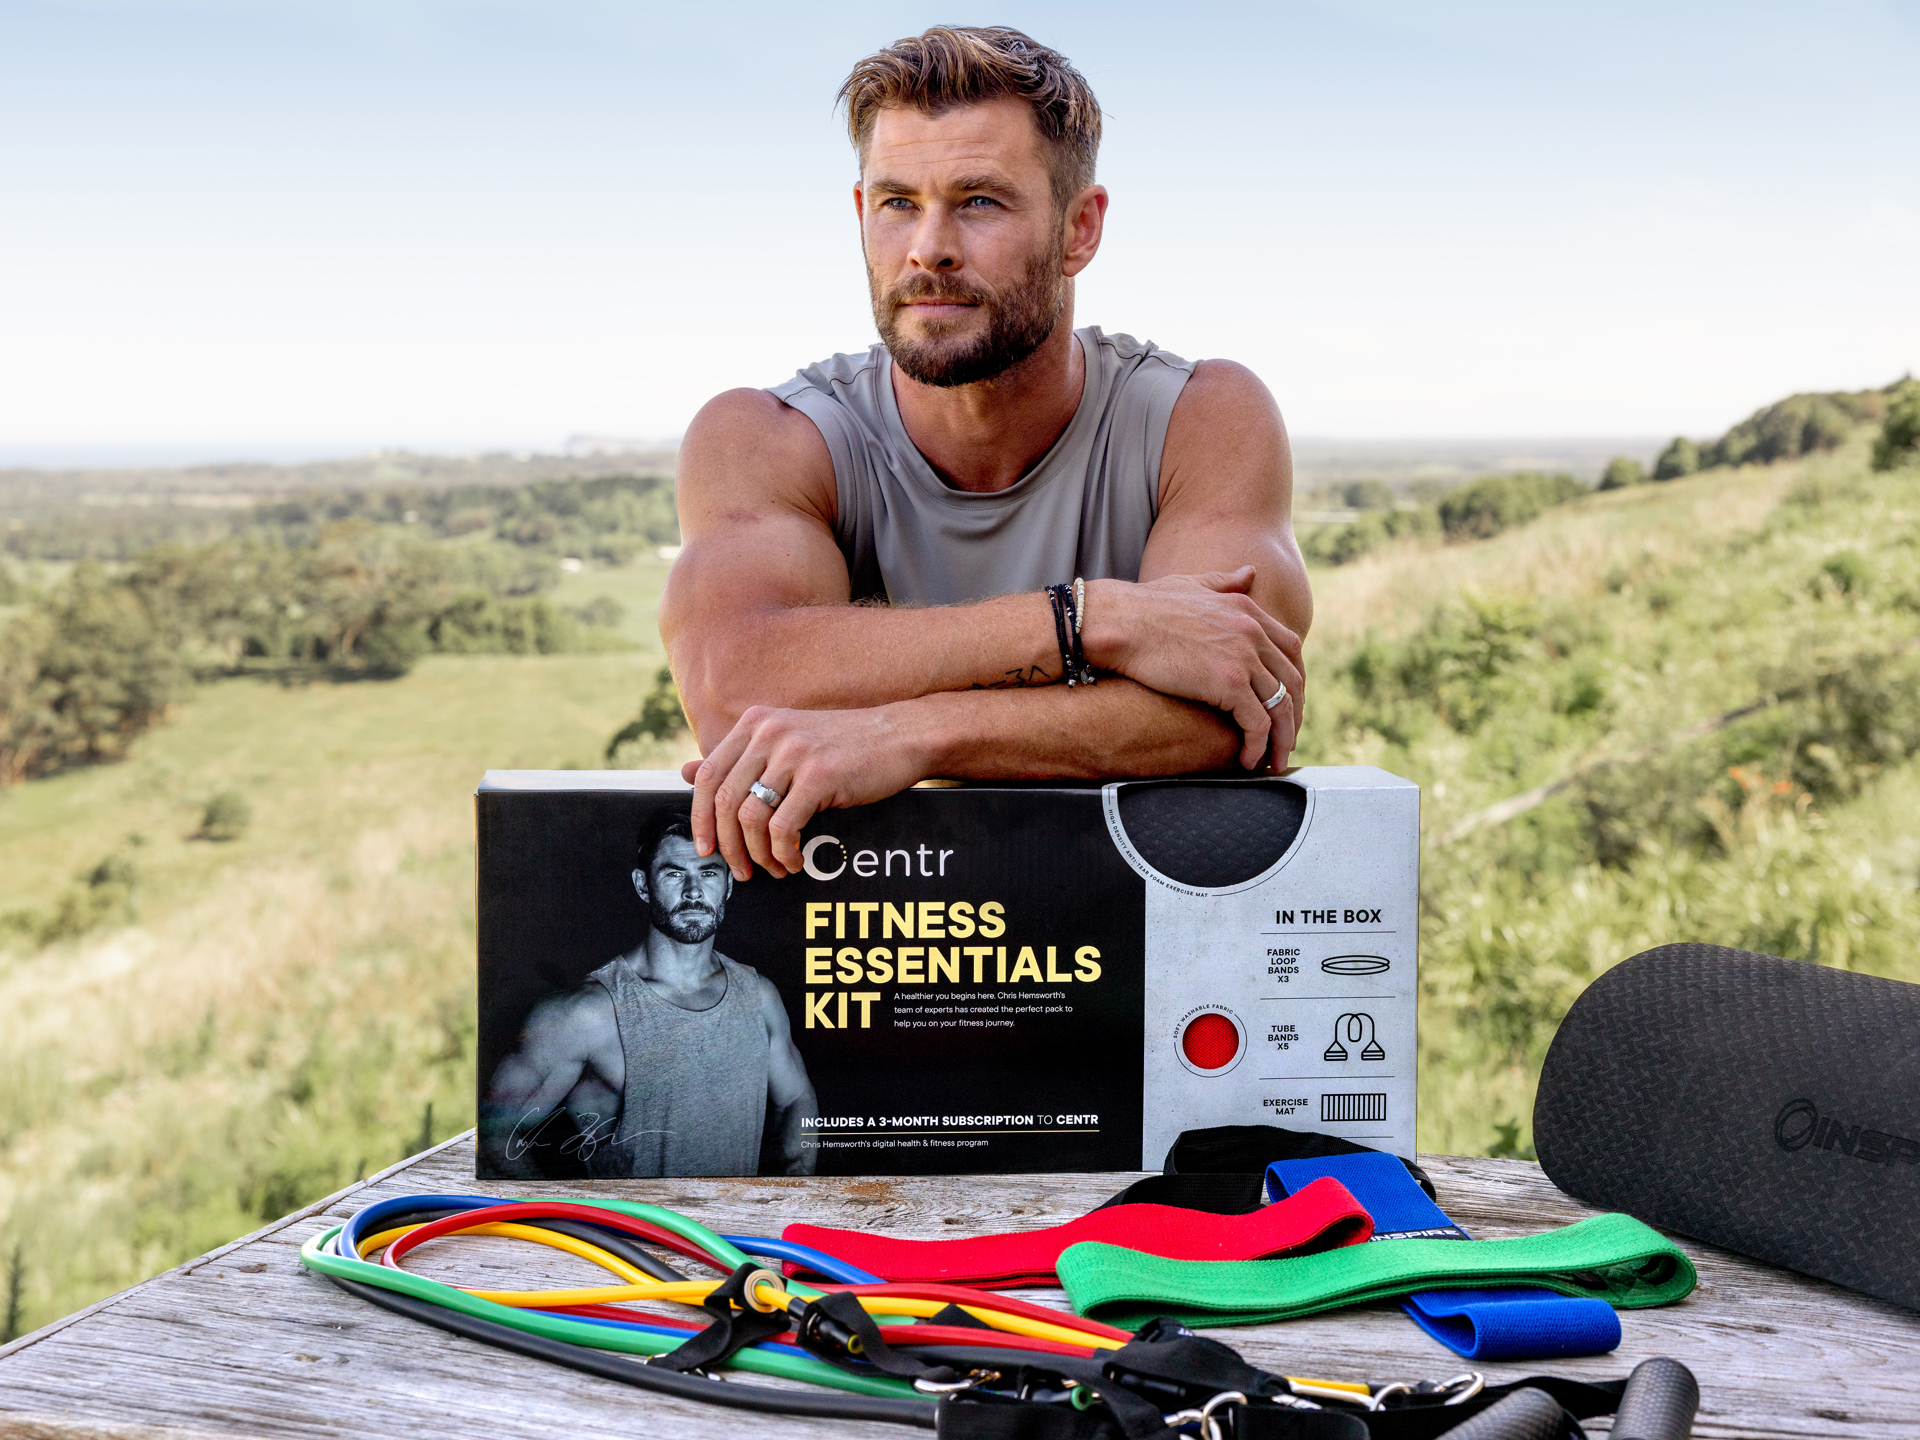 Get moving with the Centr Fitness Essentials Kit